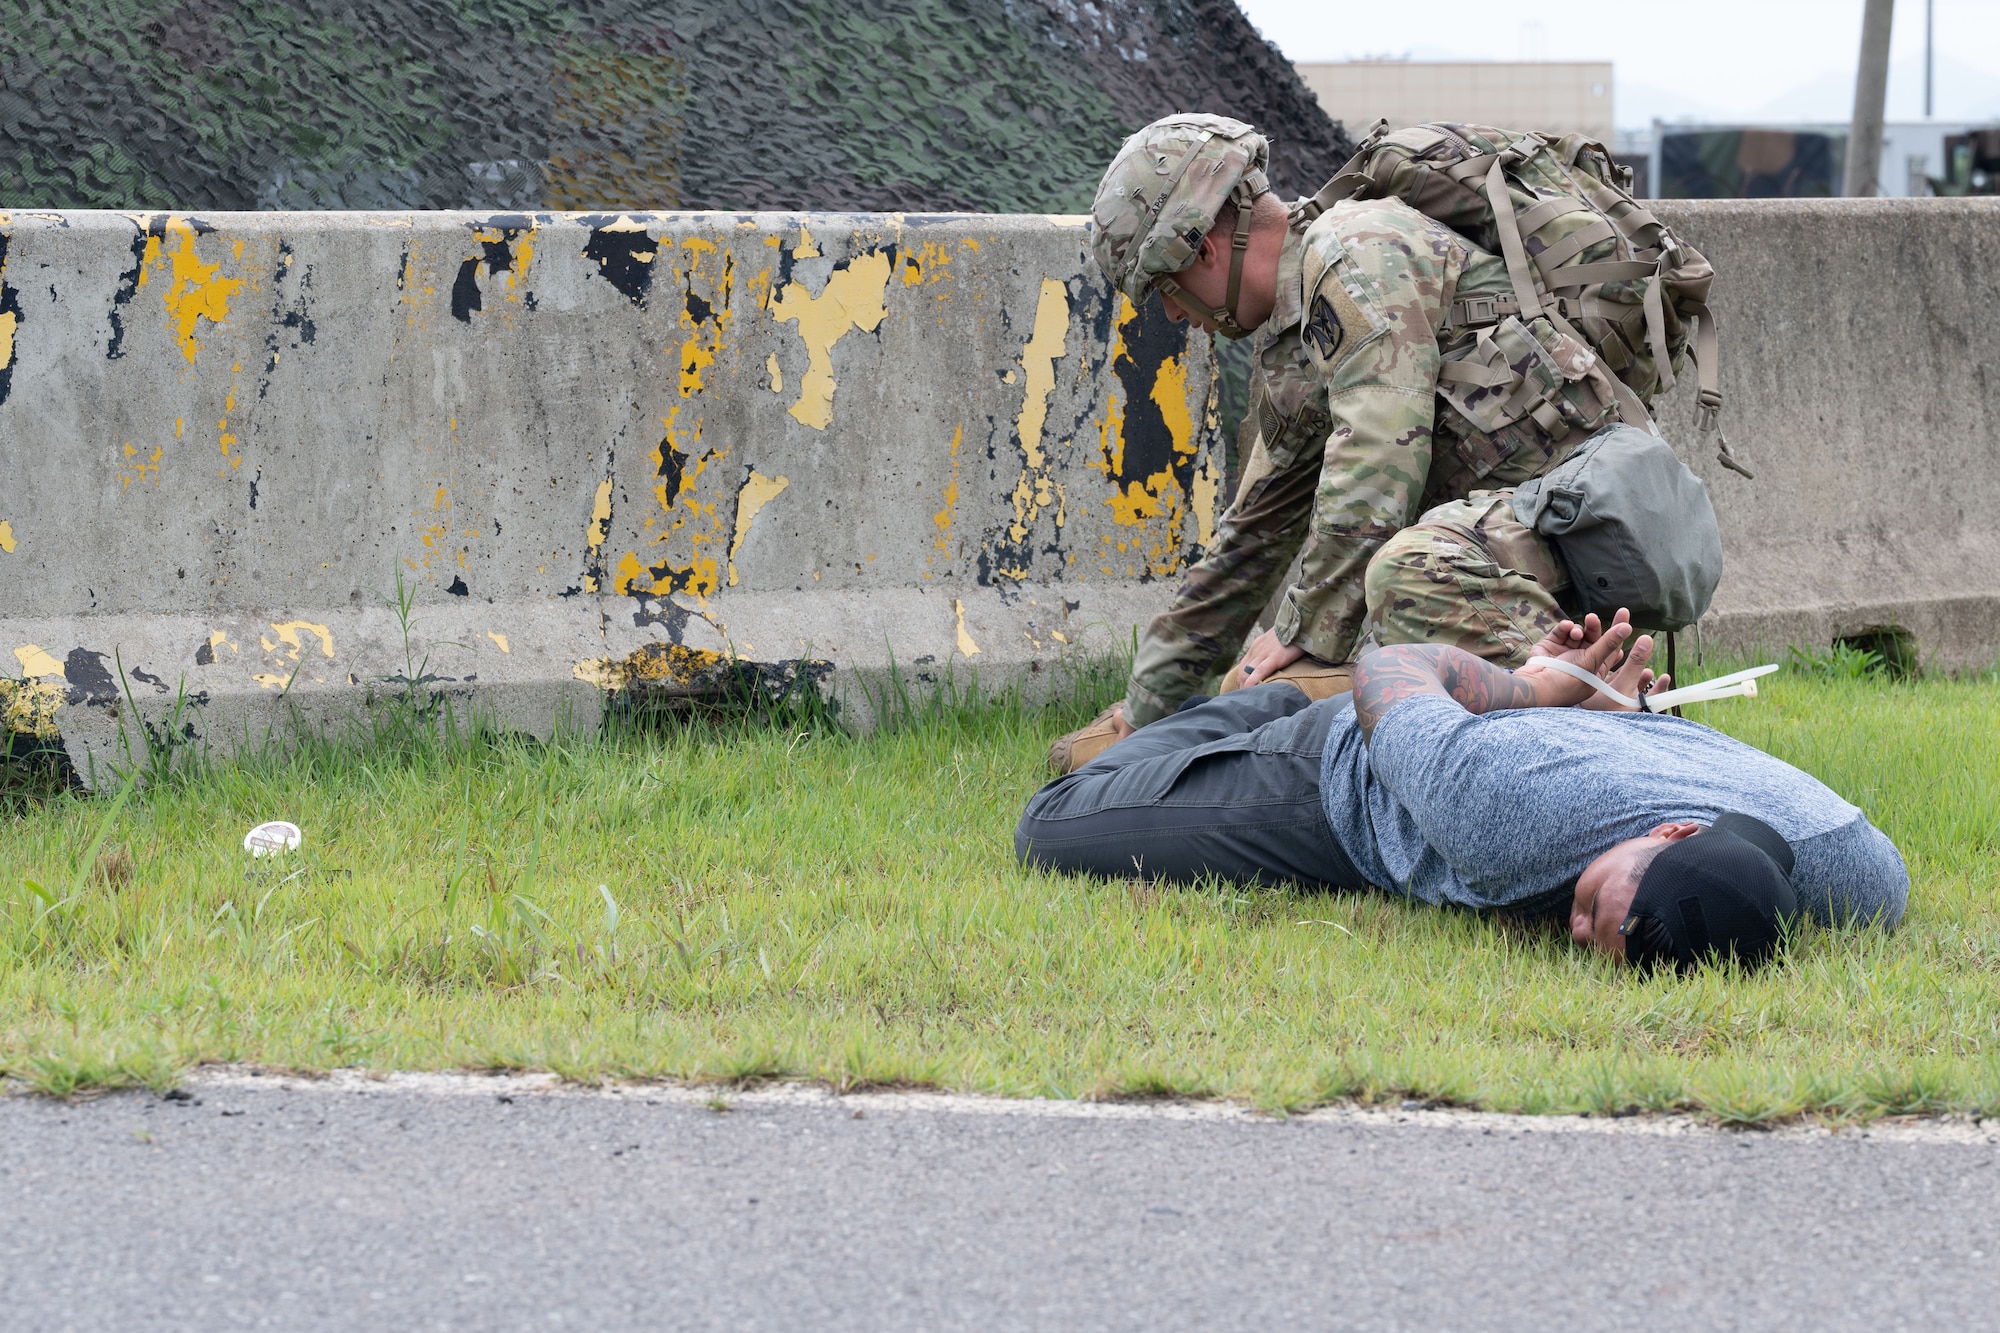 An Army solder conducts a mock frisk on an Air Force Airman in a simulated scenario.